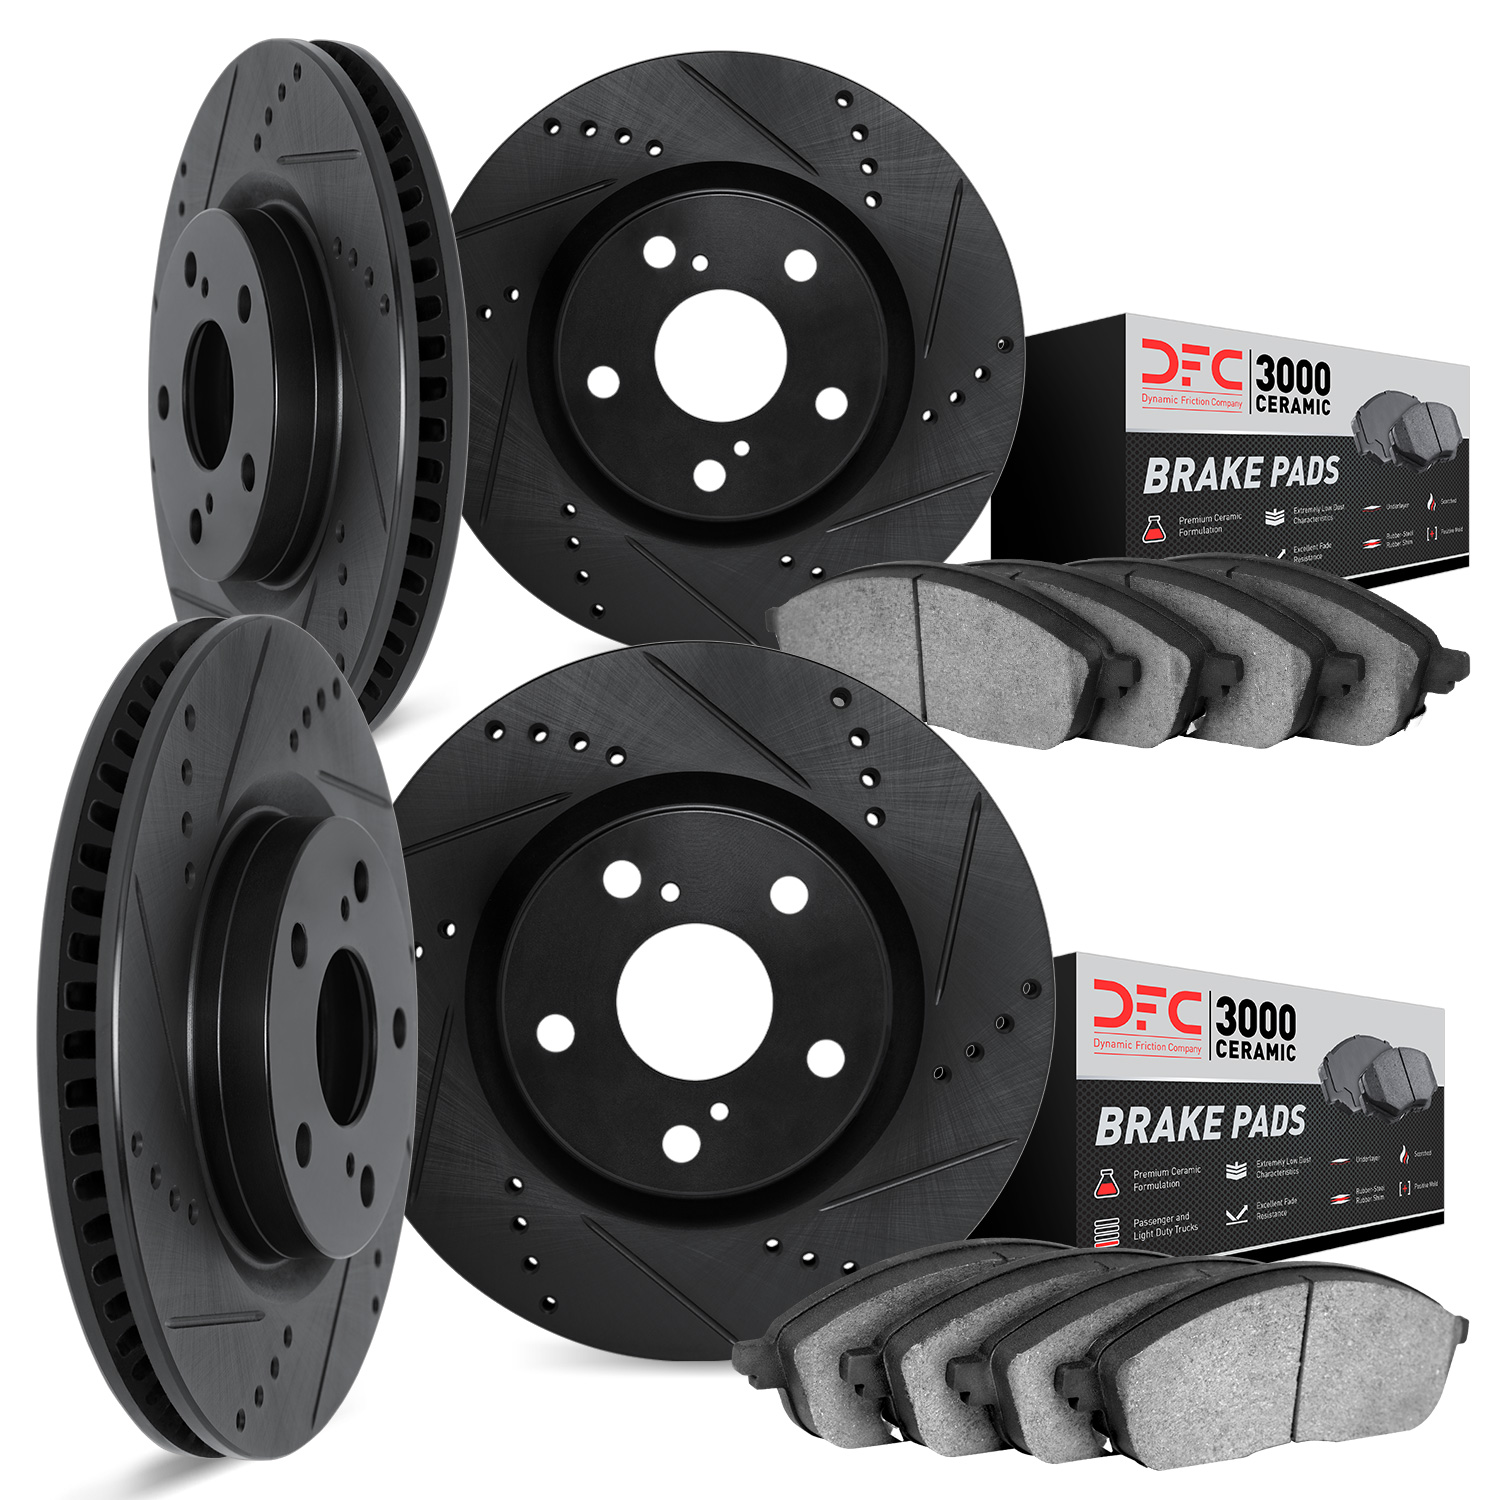 8304-31087 Drilled/Slotted Brake Rotors with 3000-Series Ceramic Brake Pads Kit [Black], 2012-2020 BMW, Position: Front and Rear